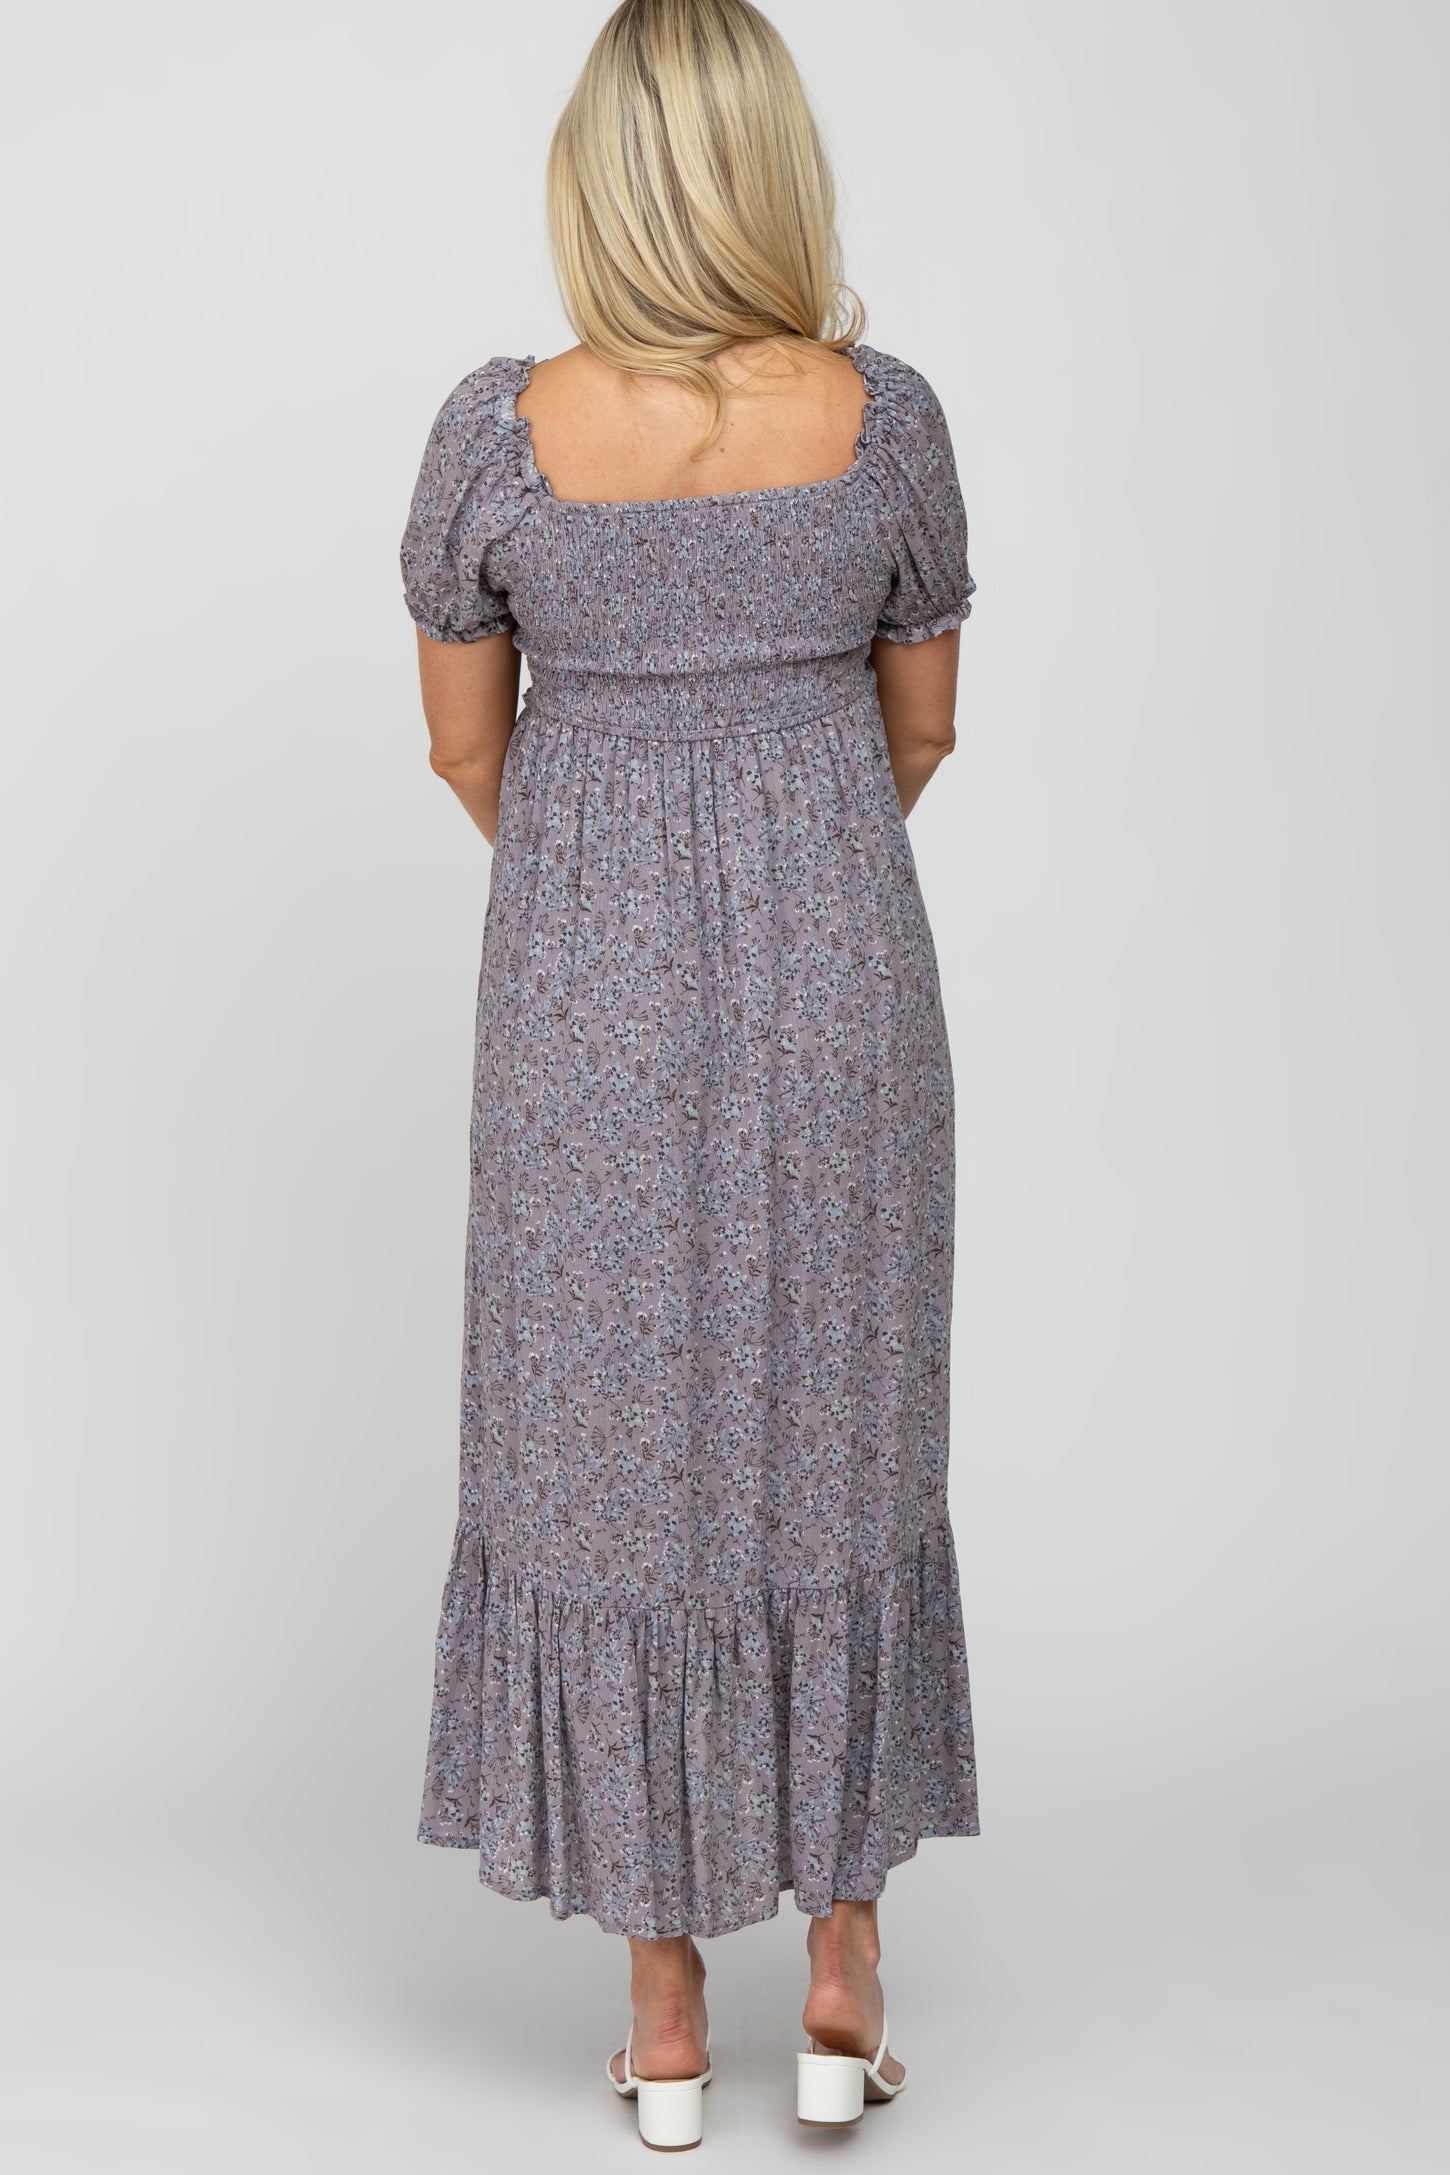 Grey Floral Smocked Puff Sleeve Maternity Maxi Dress